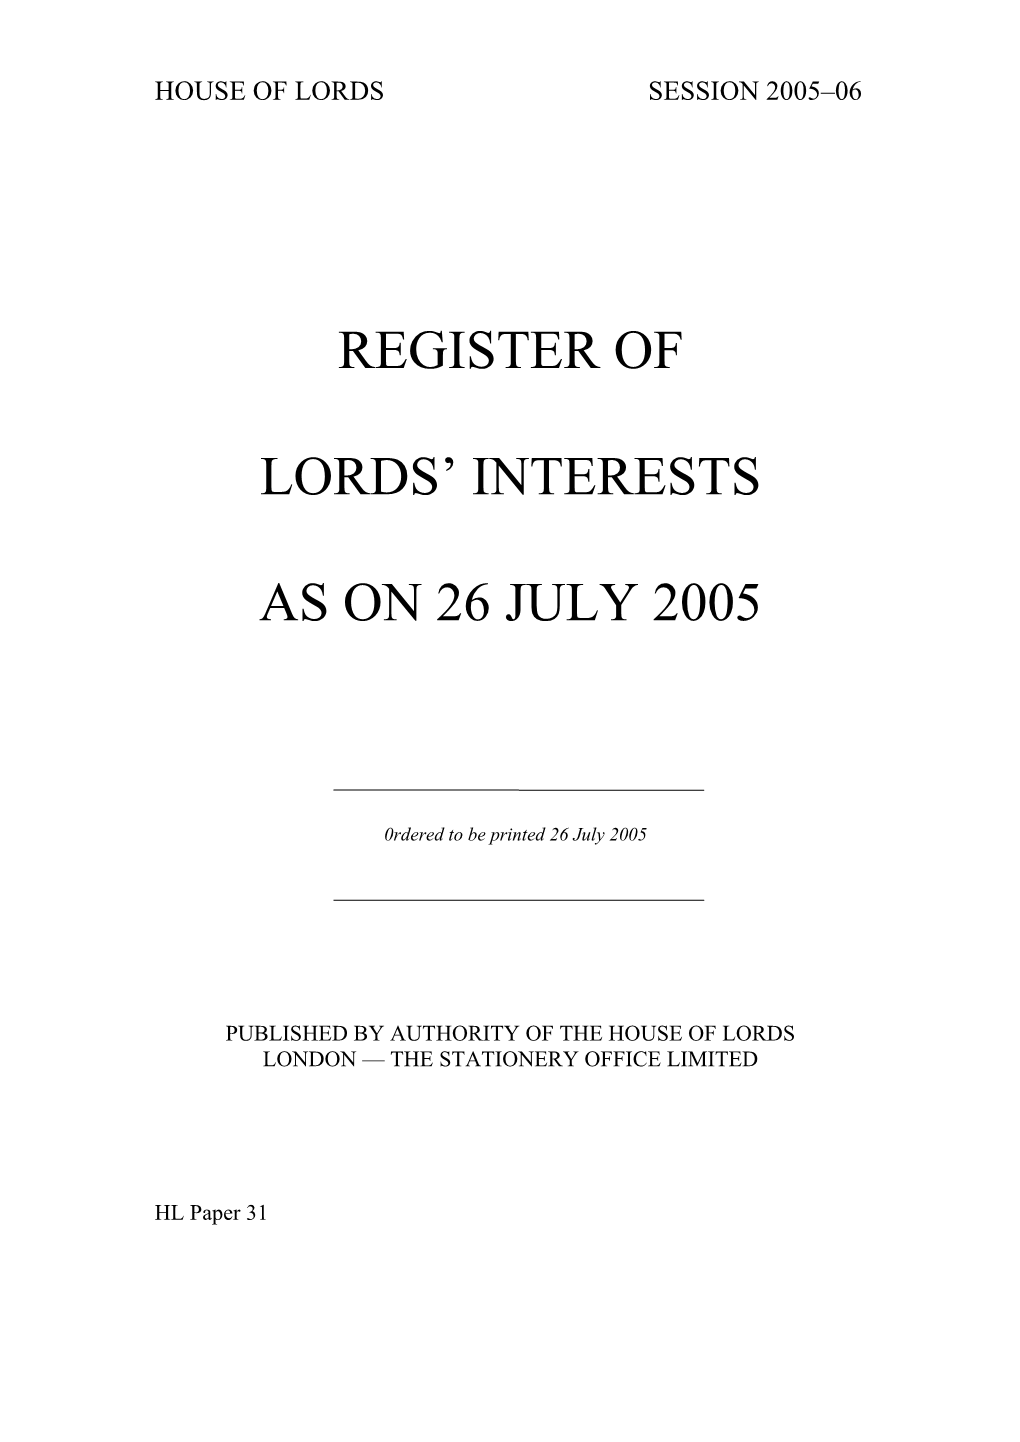 Register of Lords' Interests Session 2005-06